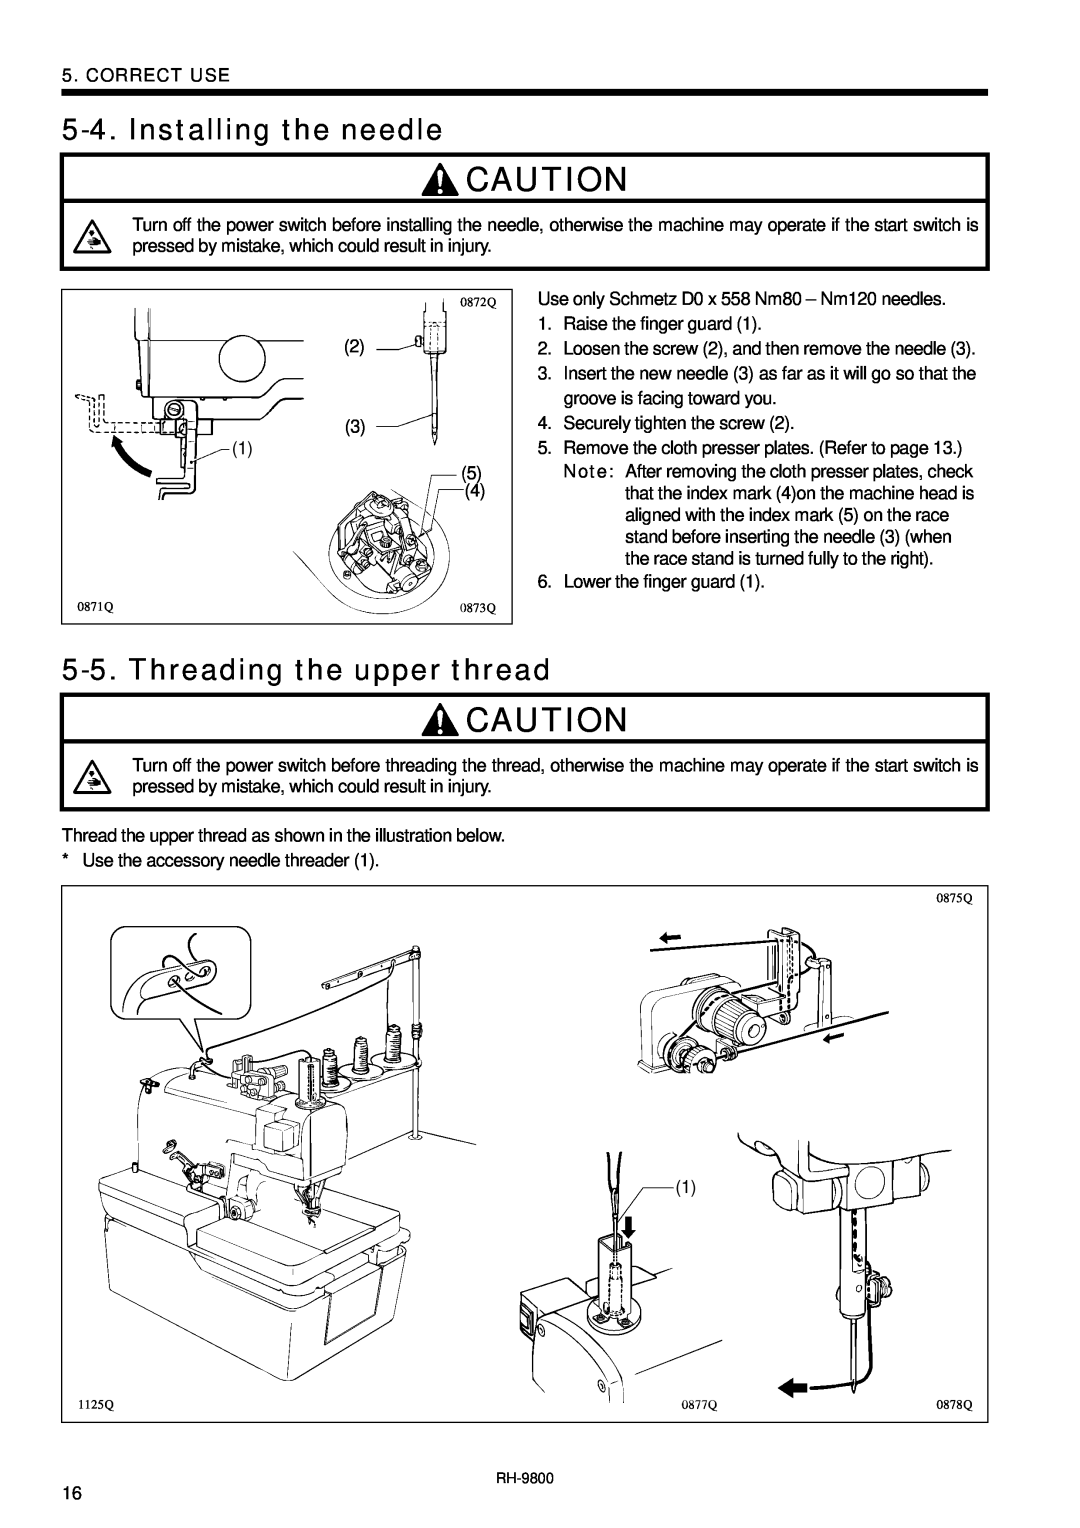 Brother DH4-B980 instruction manual Installing the needle, Threading the upper thread, Correct Use 